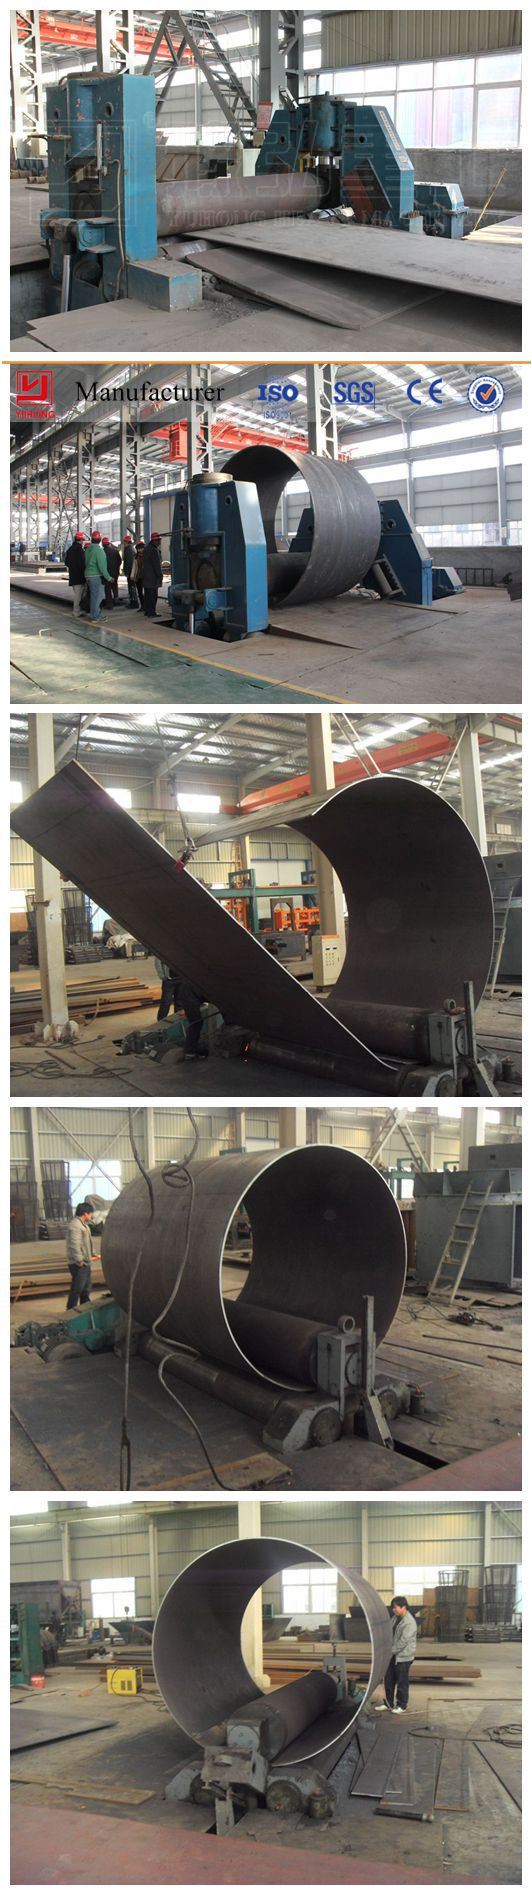 2016hot Sale Henan Yuhong ISO9001 & CE Approved Sawdust Rotary Dryer